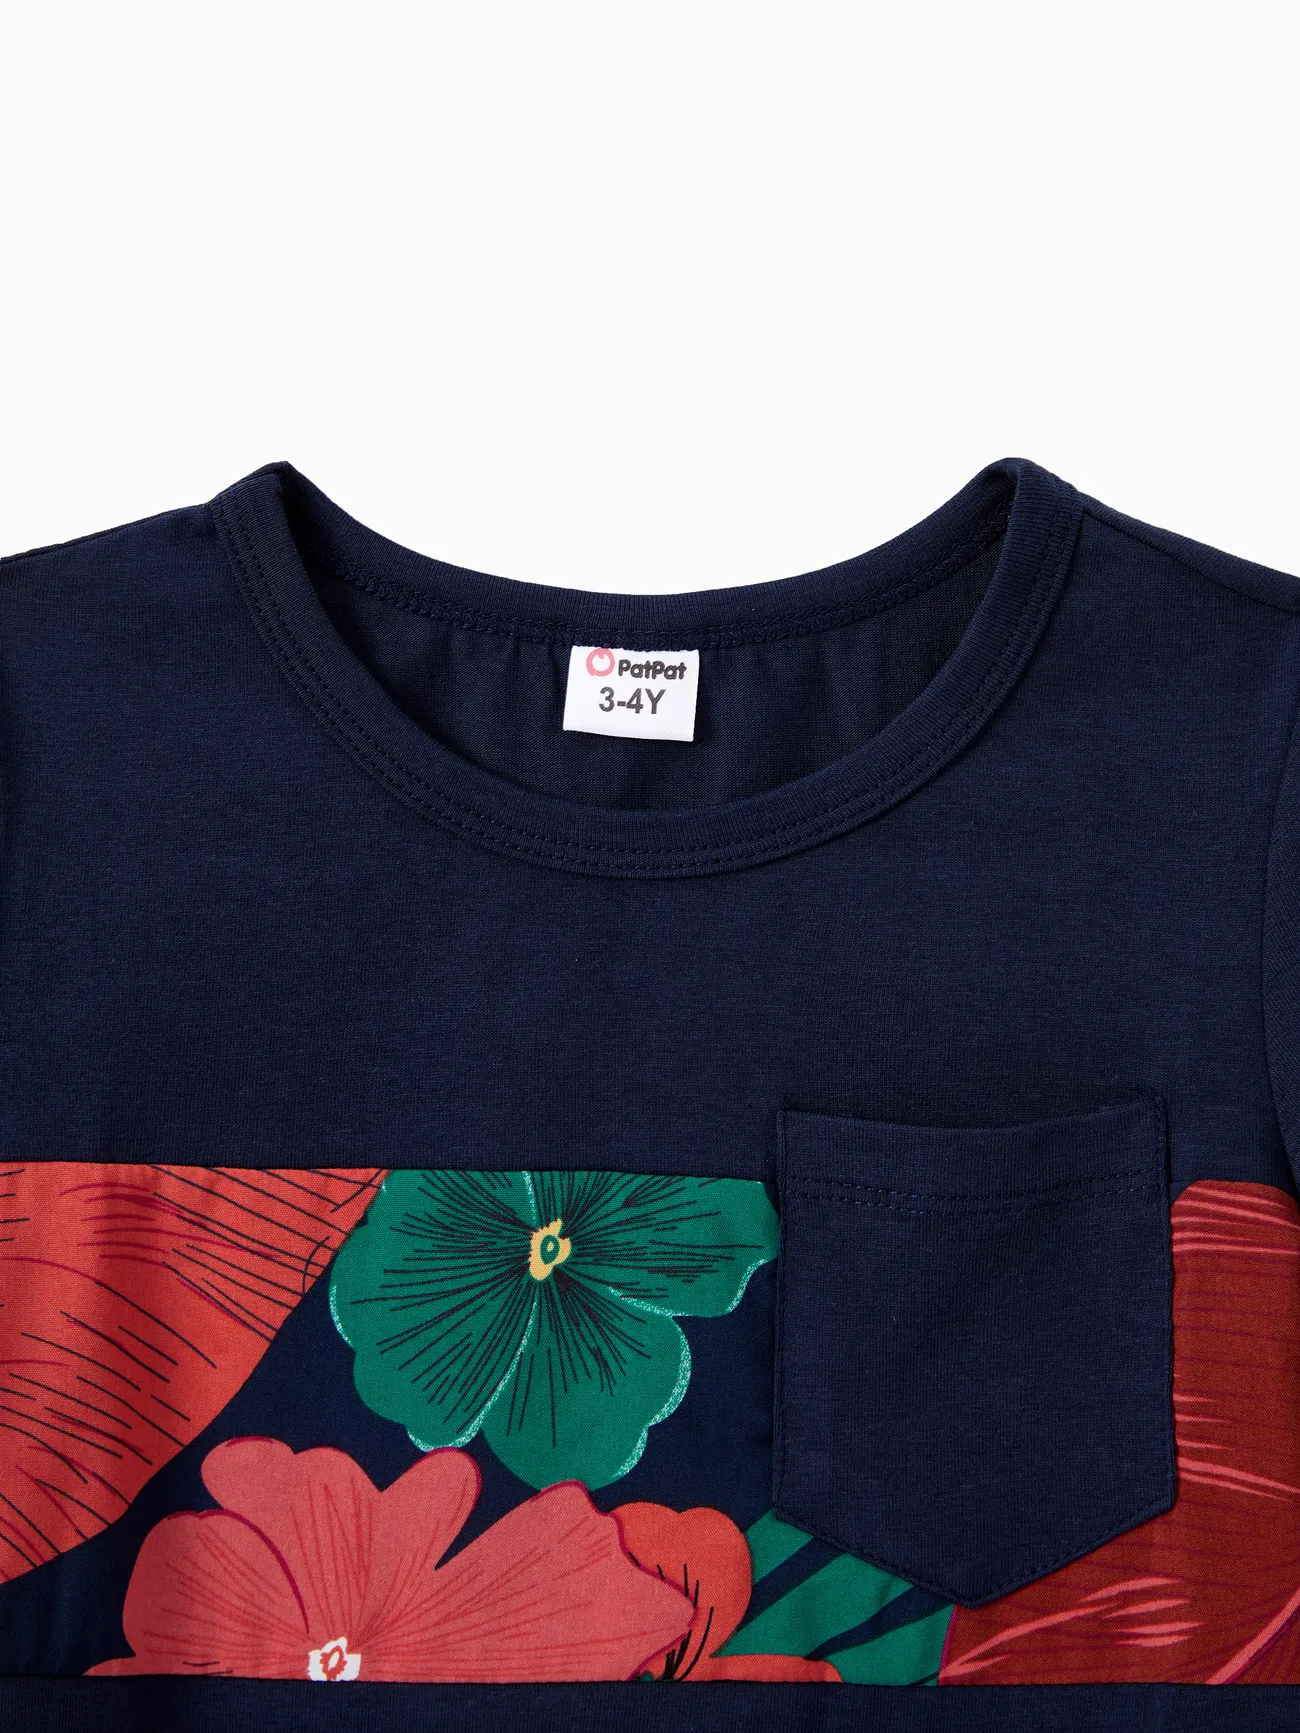 Family Matching Sets Floral Panel Black tee and V-neck Strap Dress with Hidden Snap  Deep Blue big image 1